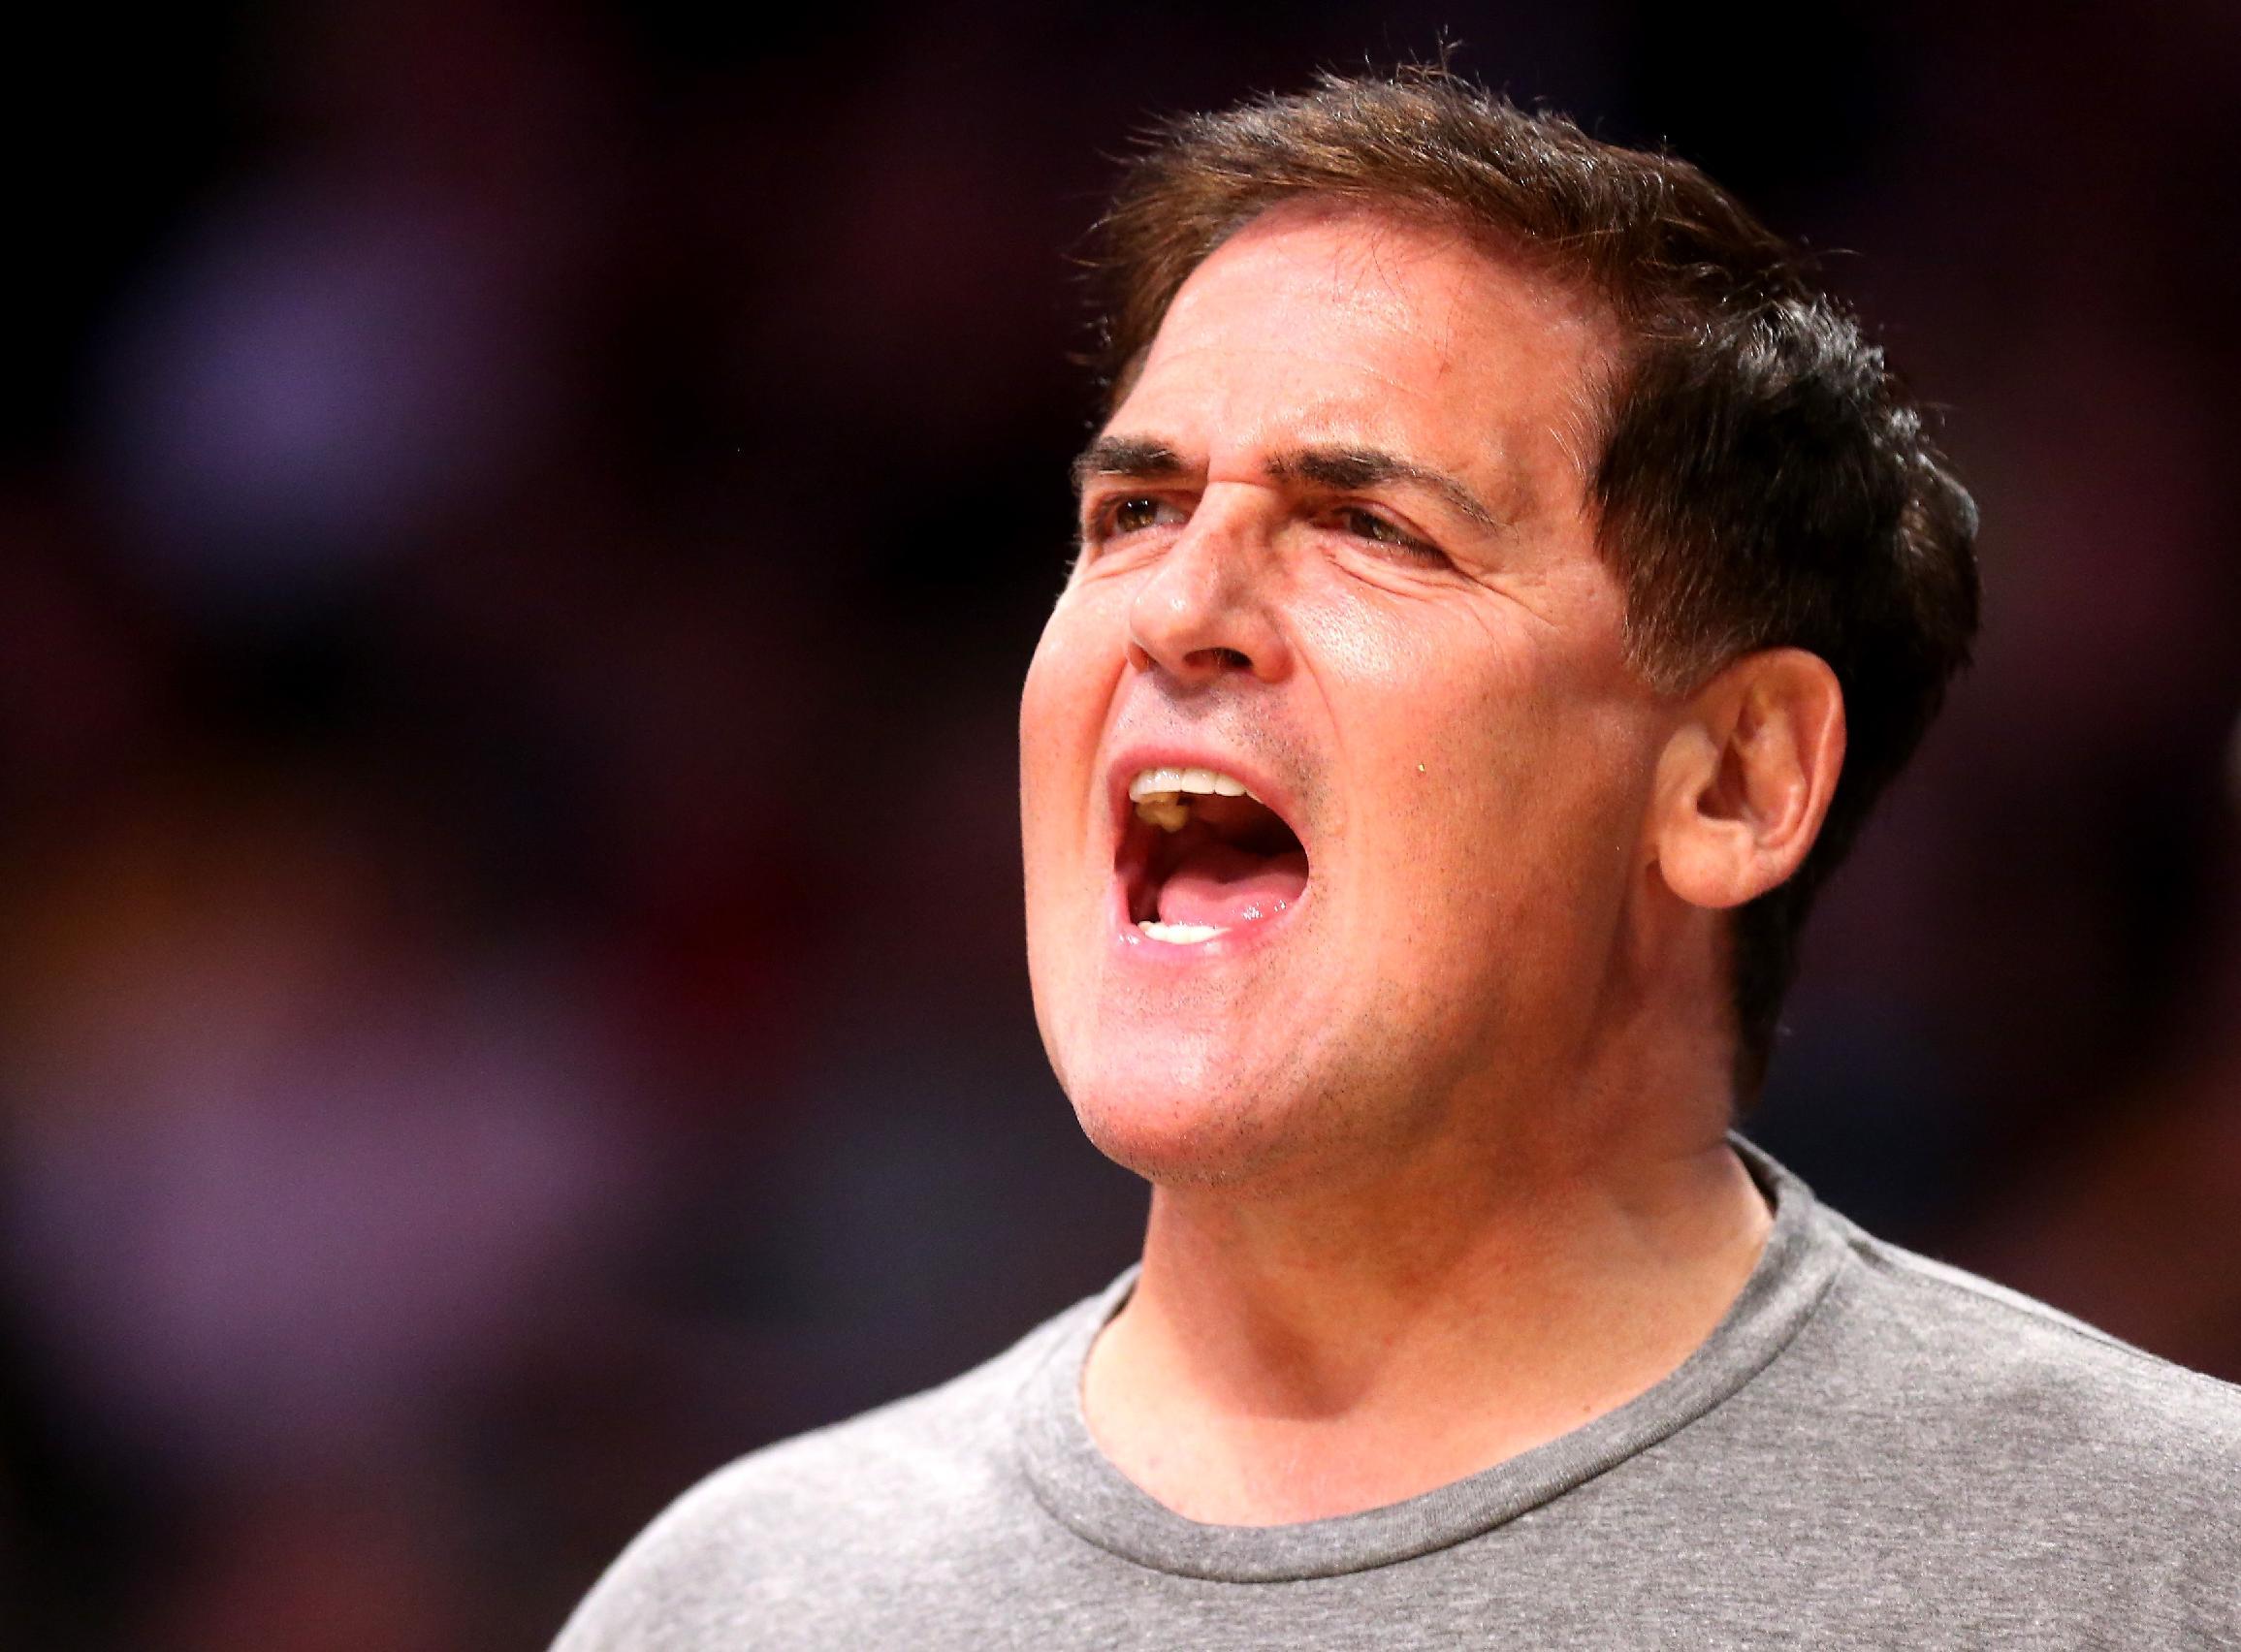 Dallas Mavericks owner Mark Cuban shouts during an April 2015 game against the Los Angeles Lakers. (Stephen Dunn/Getty Images)